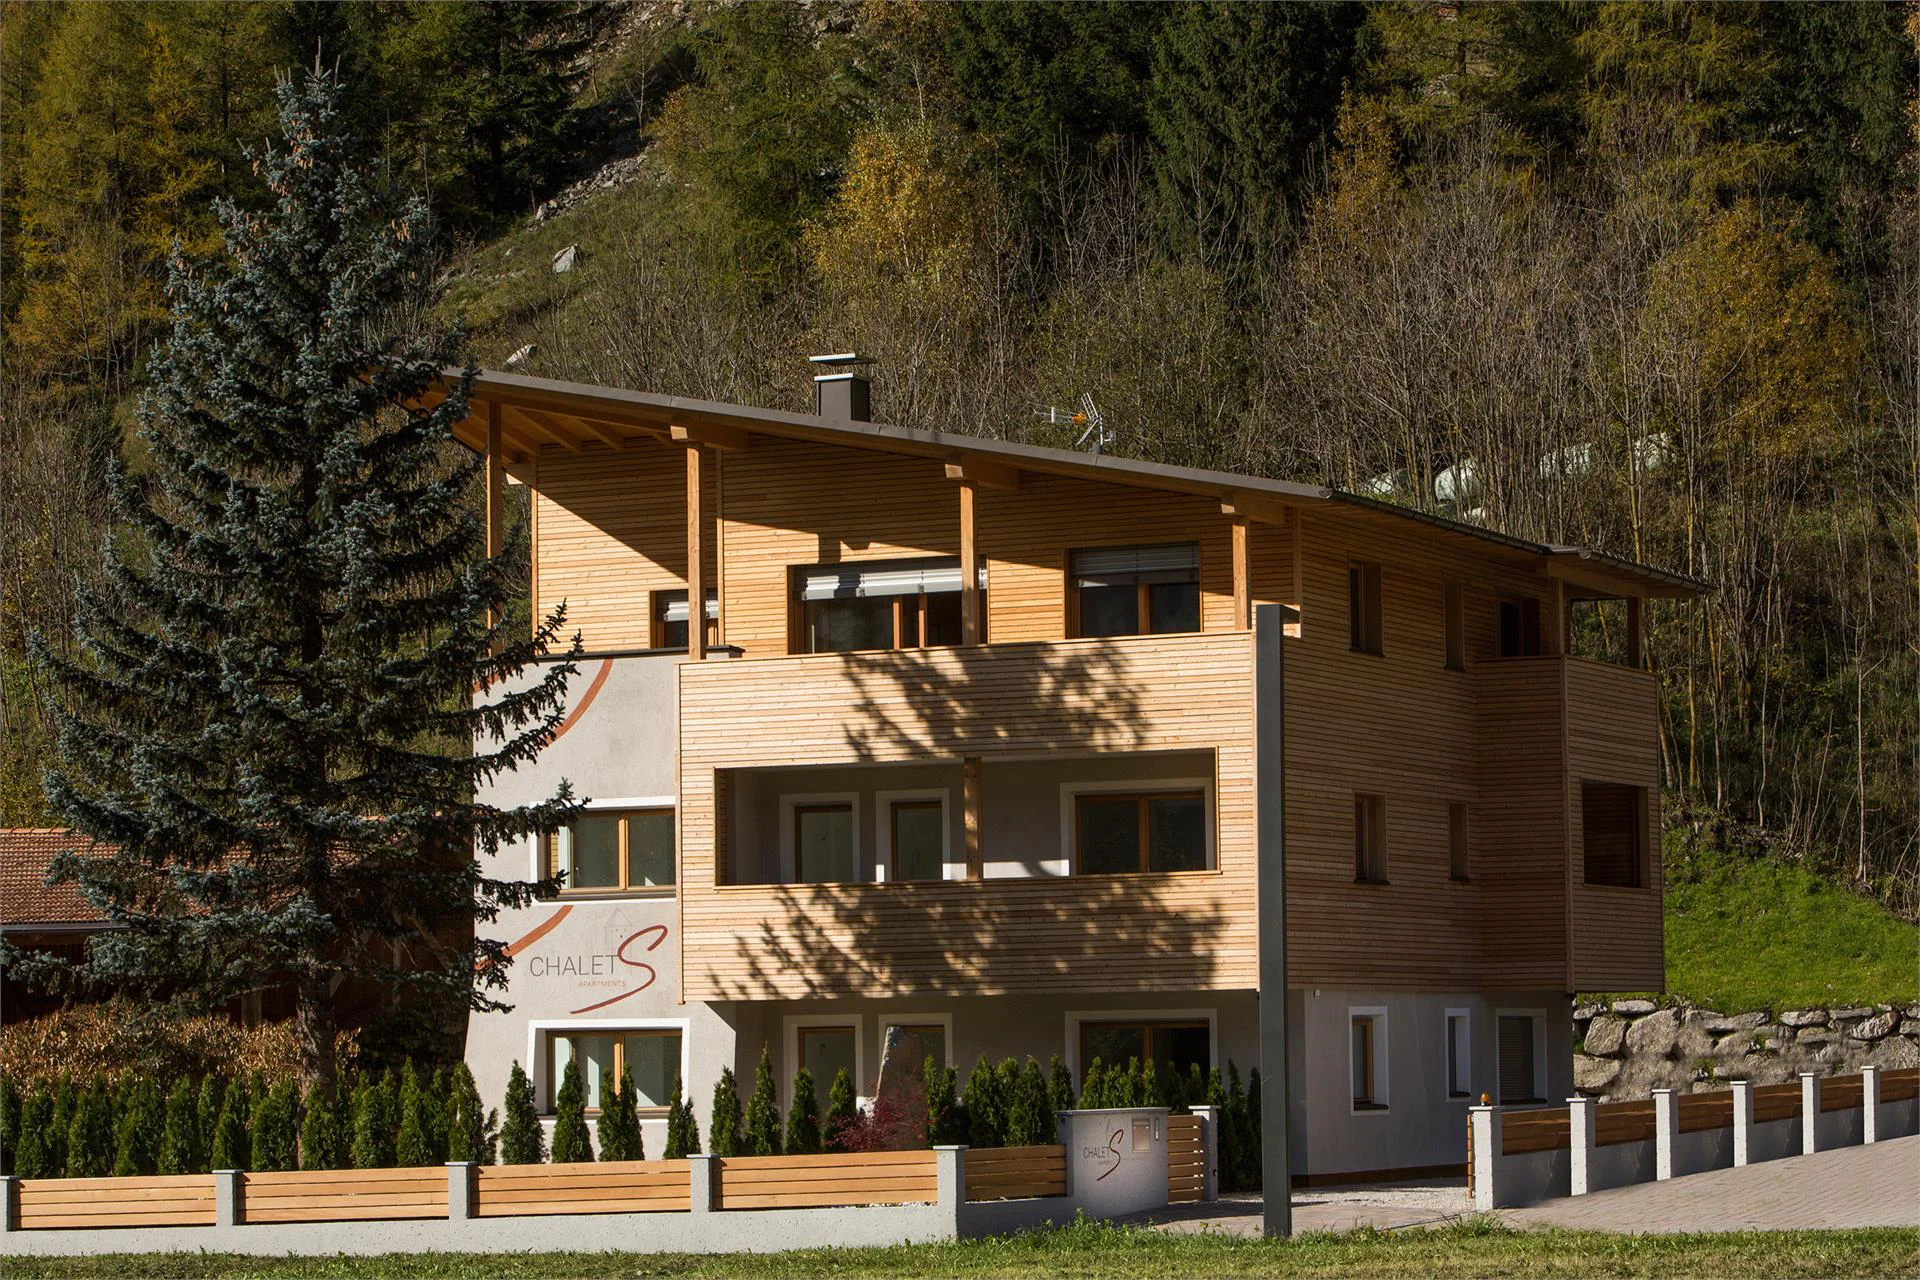 Chalet S Apartments Sand in Taufers/Campo Tures 9 suedtirol.info